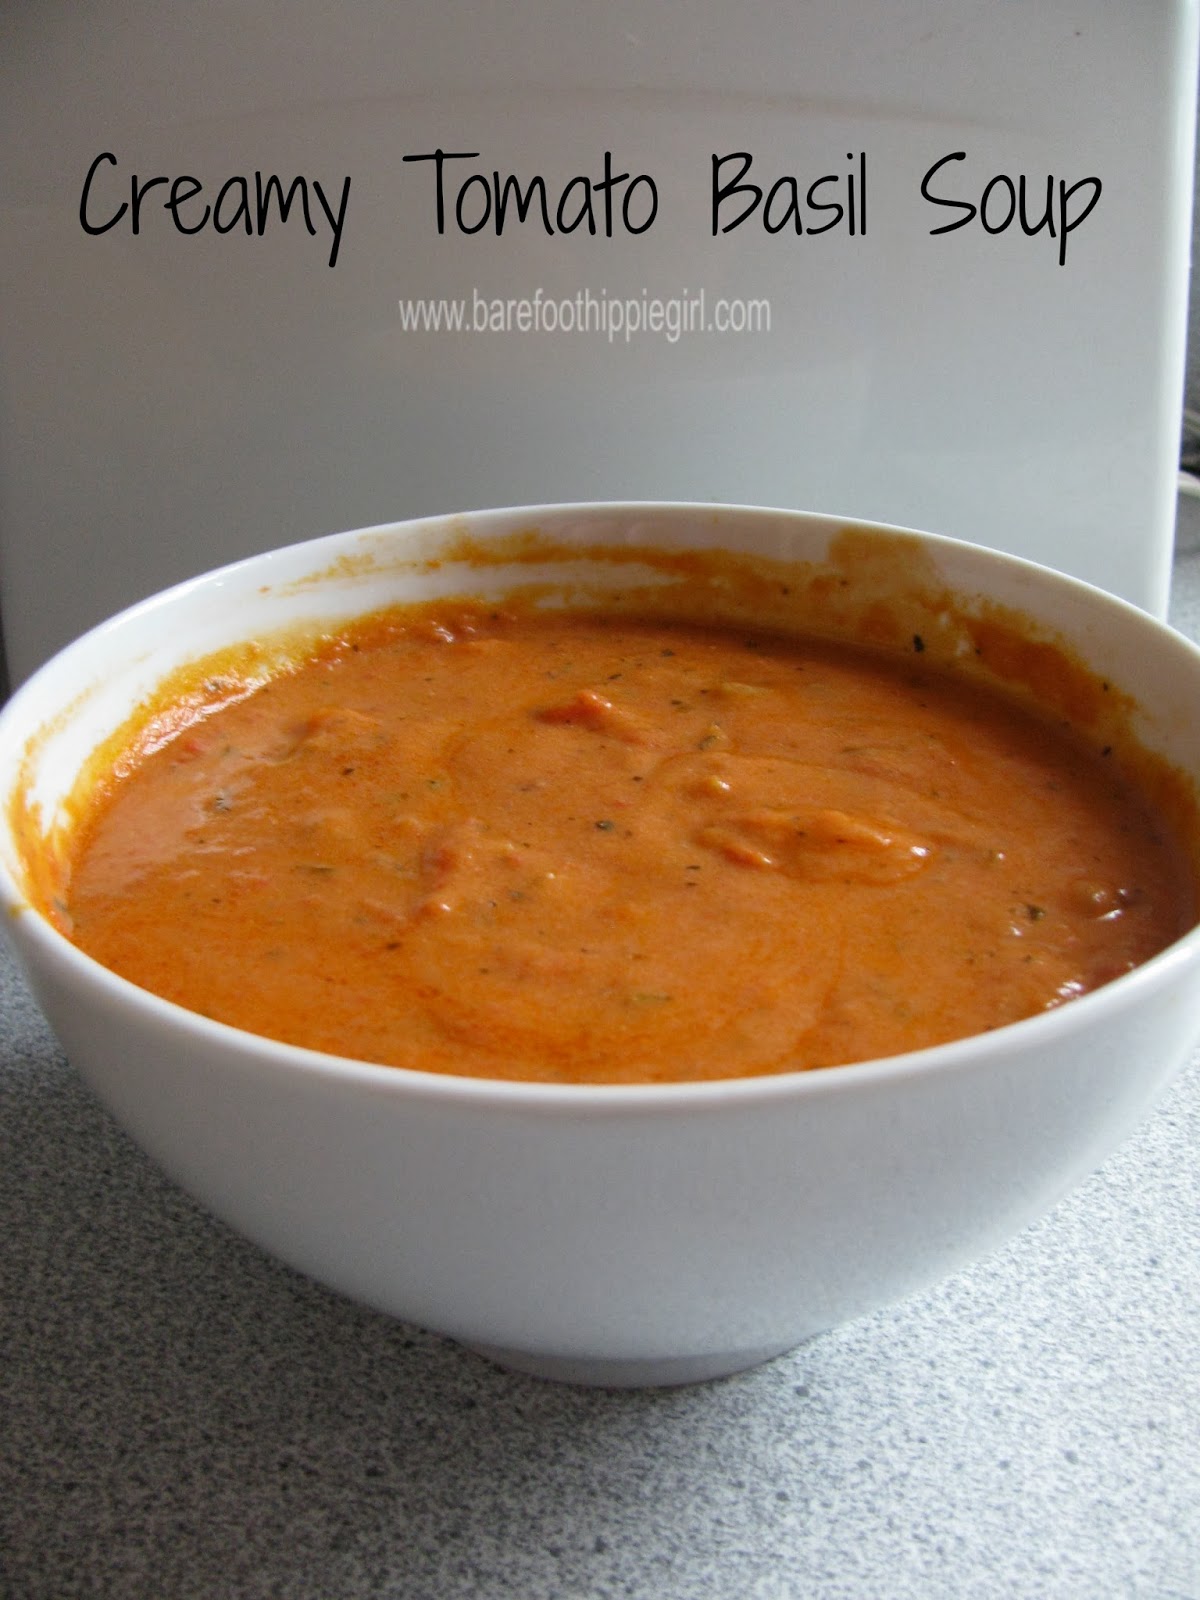 Barefoot Hippie Girl: Tomato Soup and Turkey Chipotle Mayo Sandwiches